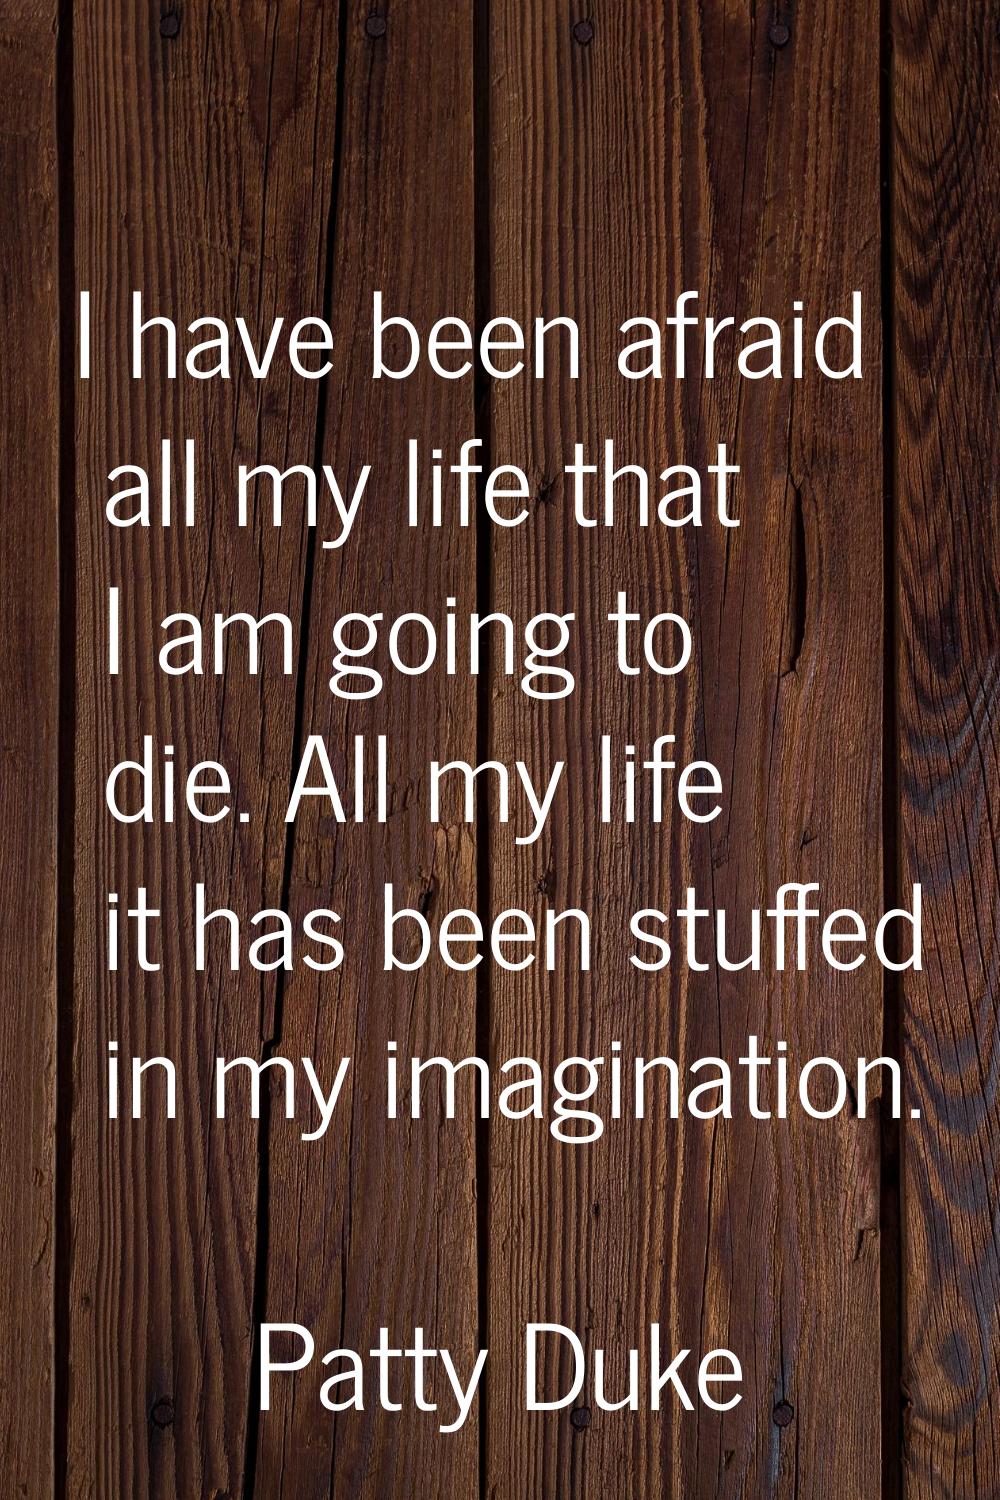 I have been afraid all my life that I am going to die. All my life it has been stuffed in my imagin